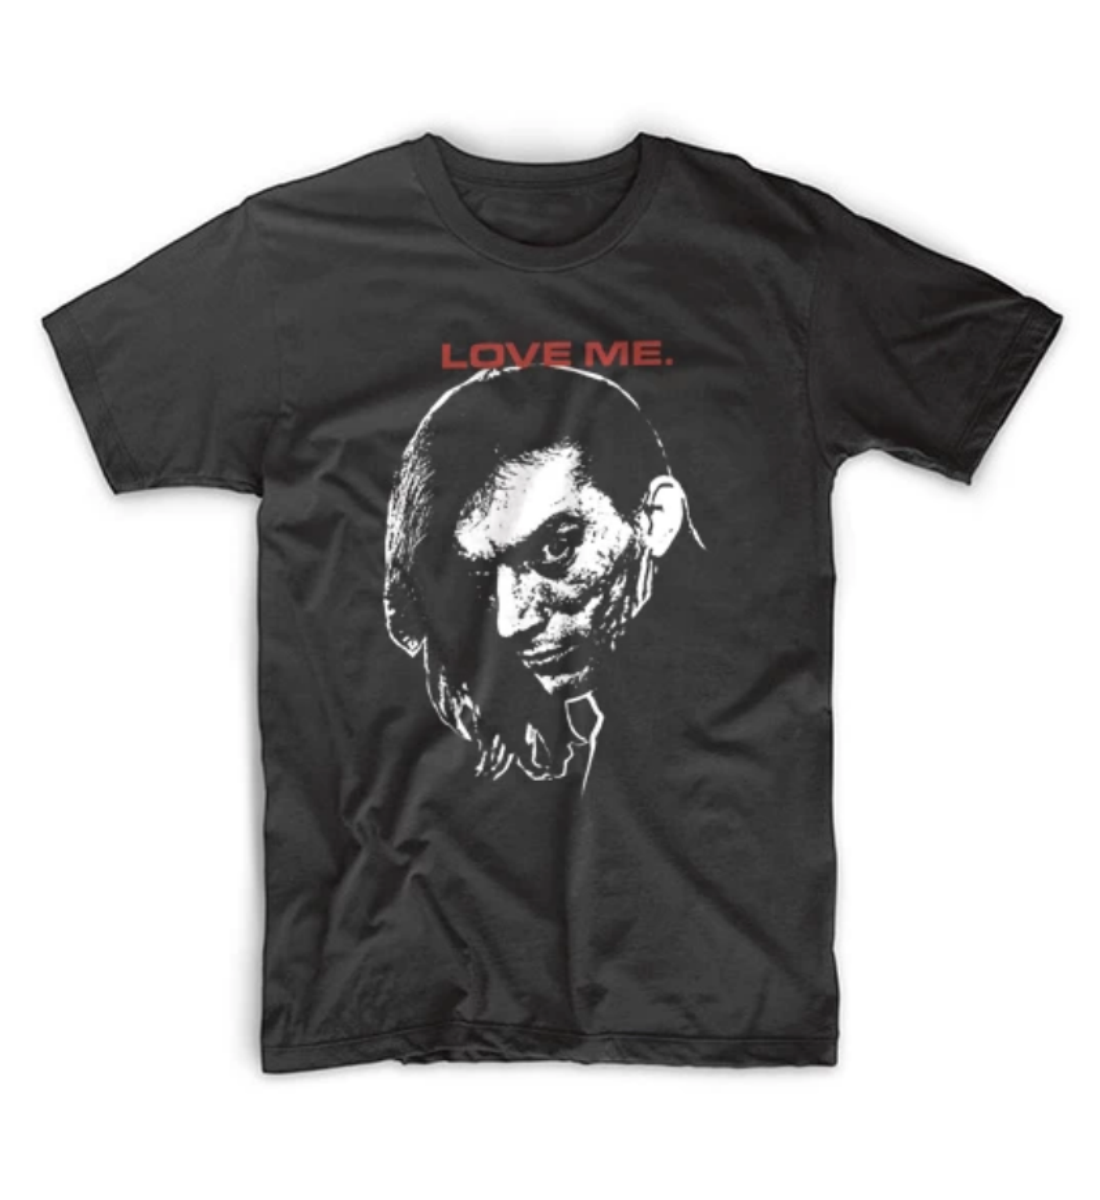 The Cramps co-founder, Bryan Gregory "LOVE ME" white image red lettering on unisex 100% cotton black t-shirt, shown flatlay